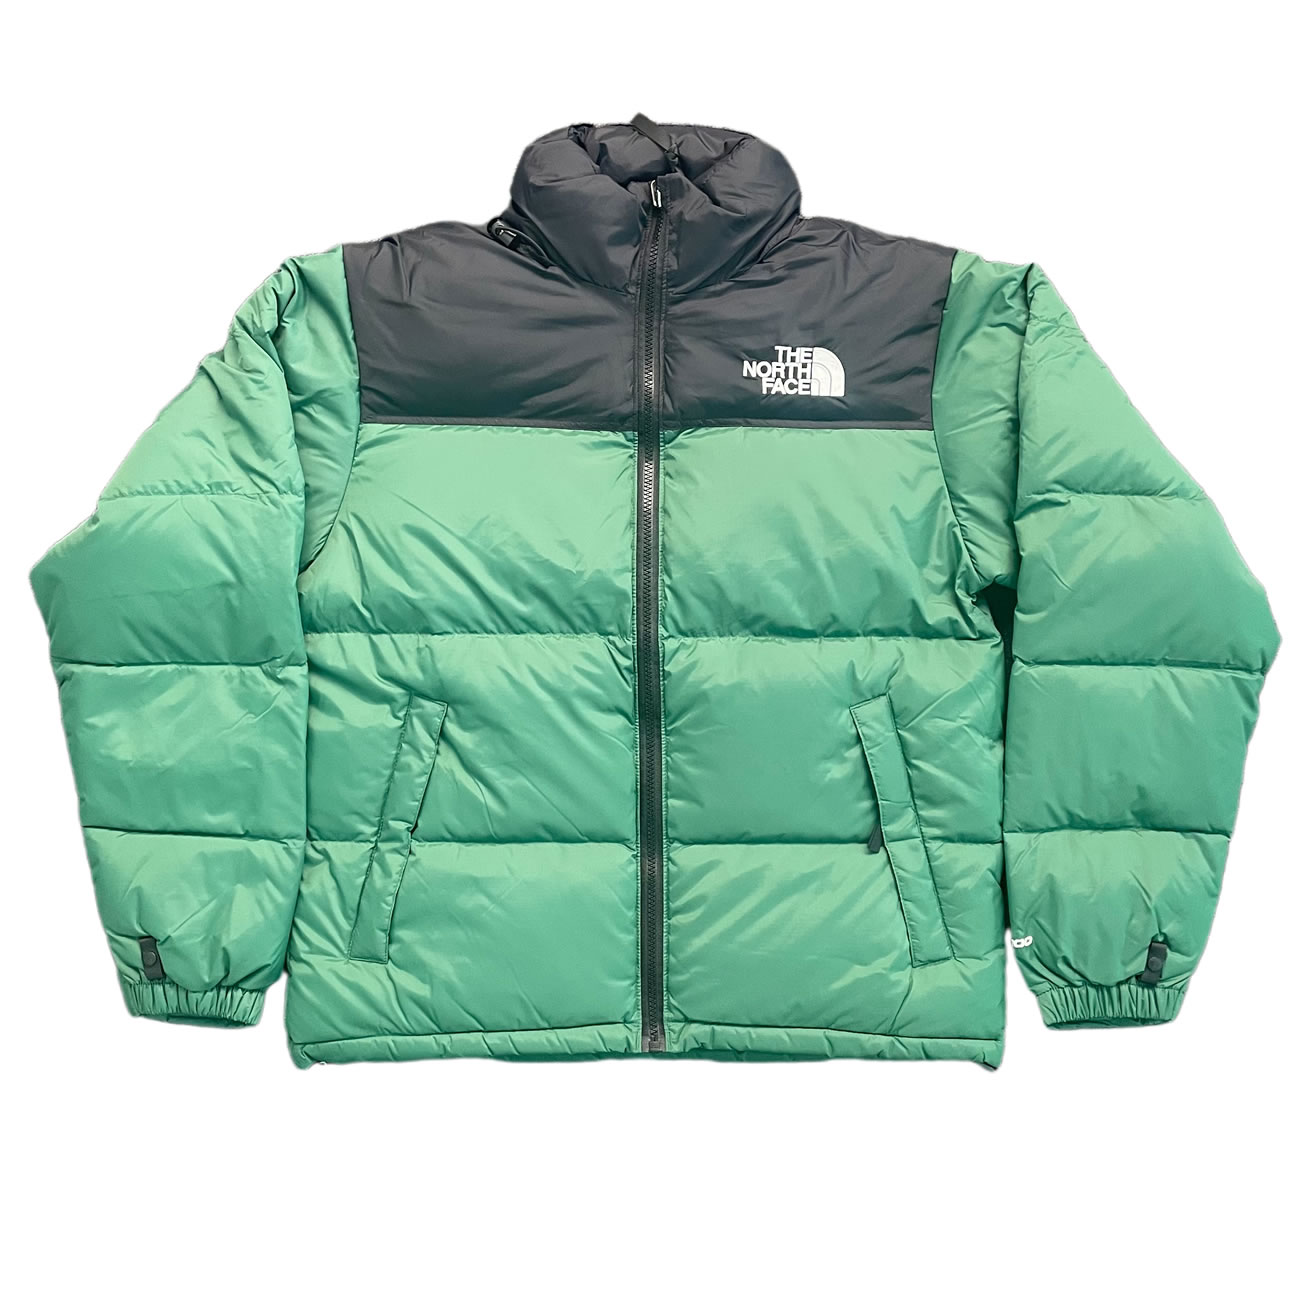 The North Face 1996 Retro Nuptse Packable Jacket Fw21 (13) - newkick.org